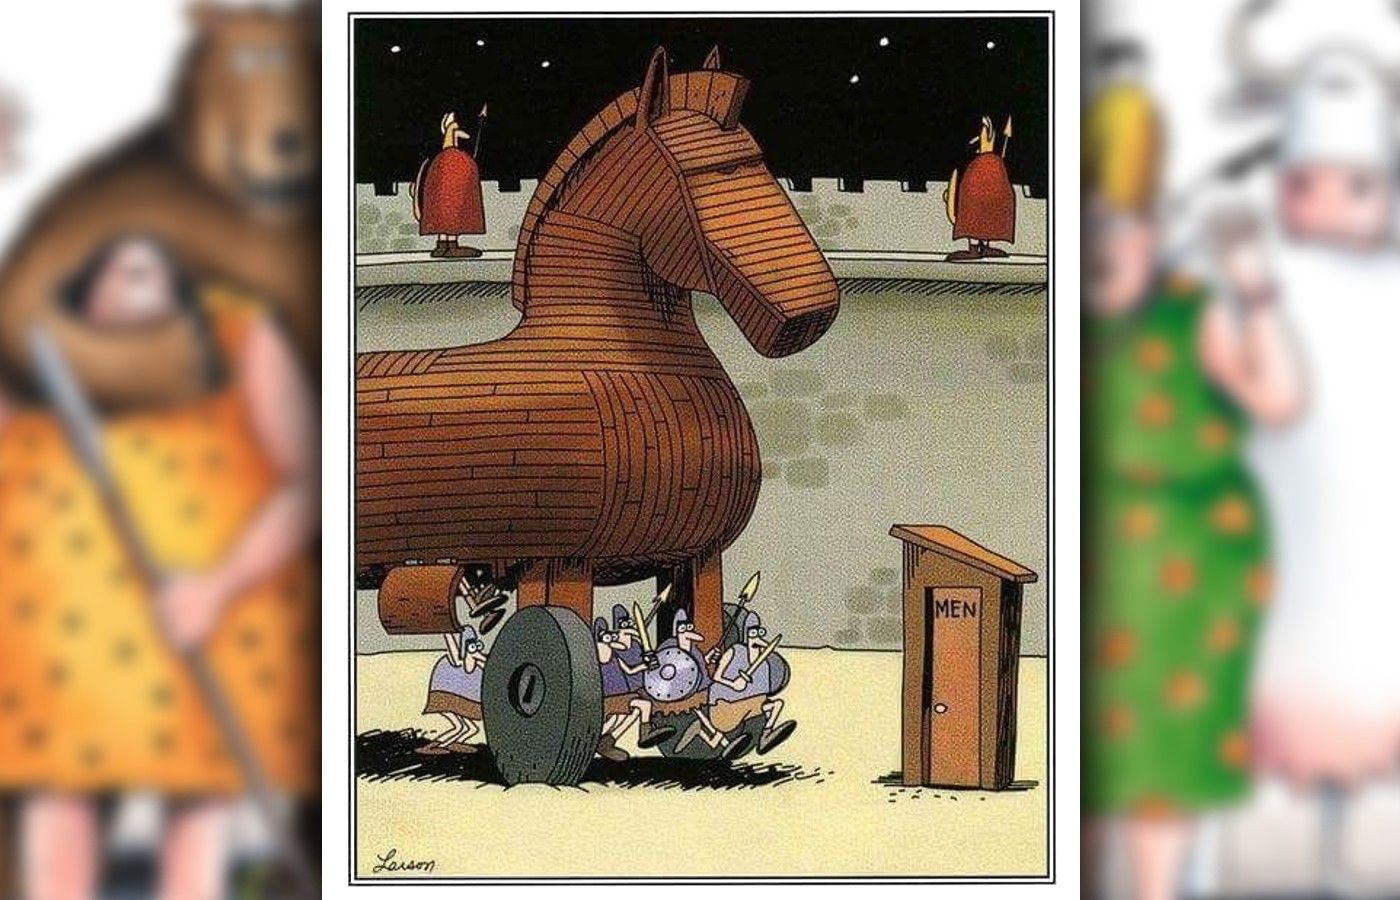 far side comic where the soldiers leave the trojan horse to pee